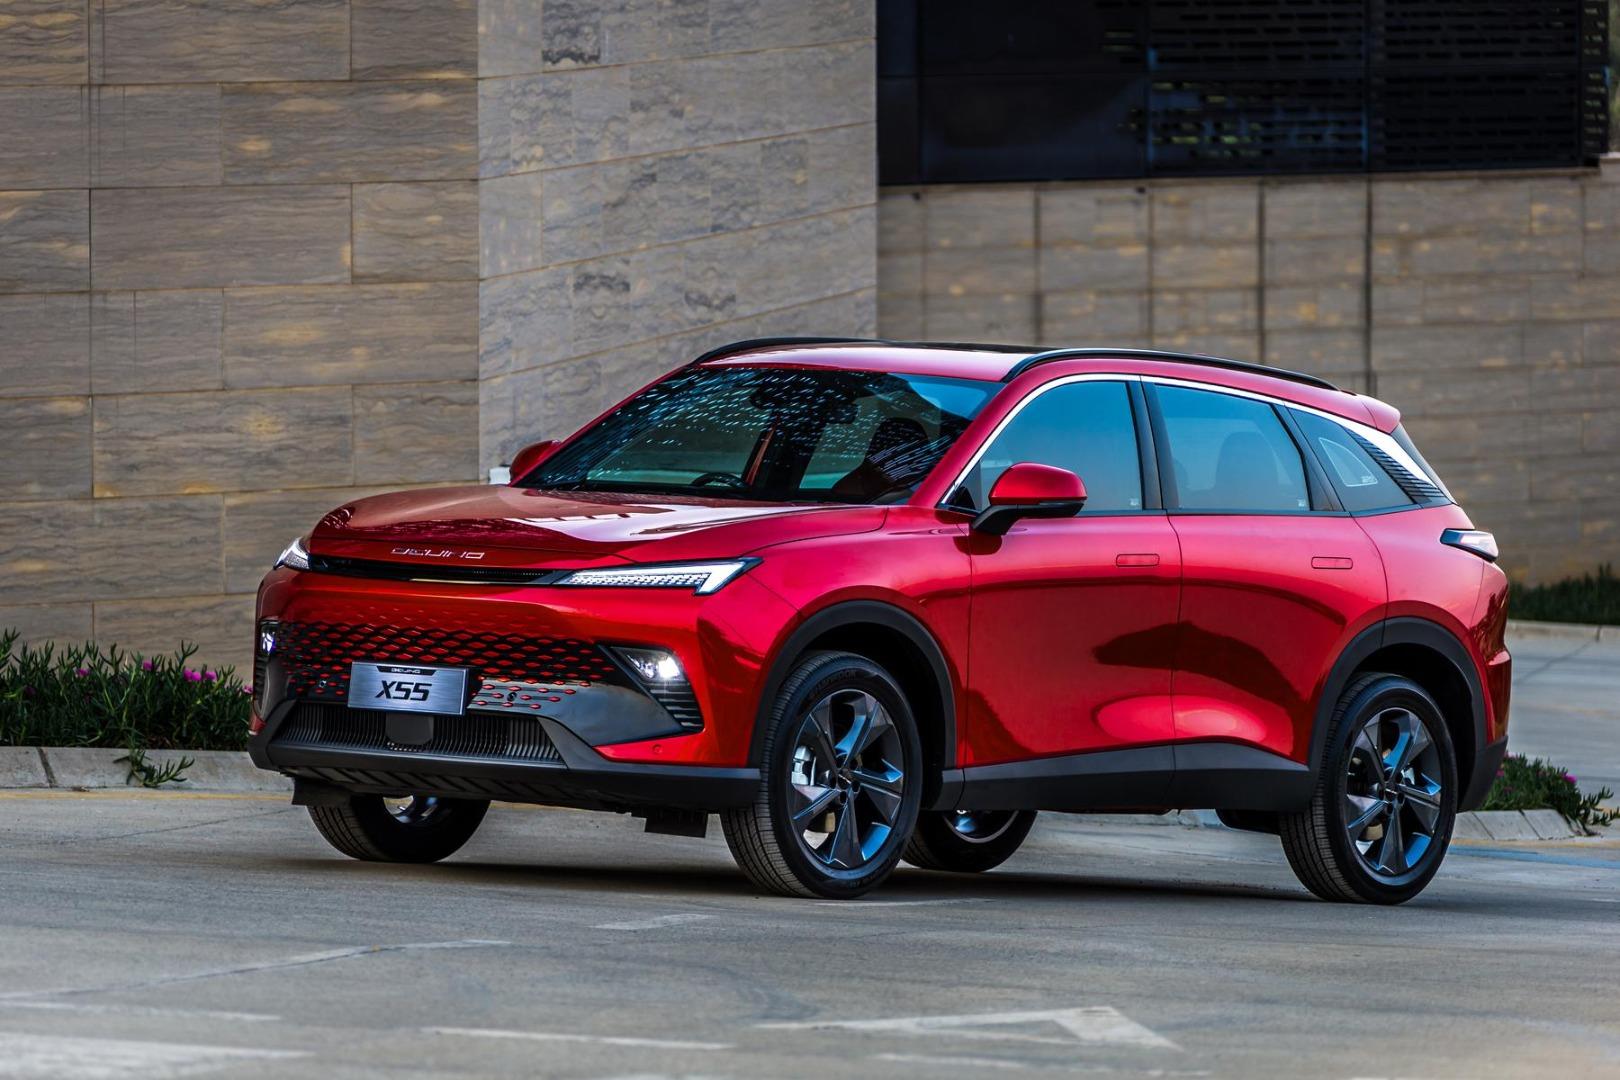 is the baic beijing x55 expensive to maintain?